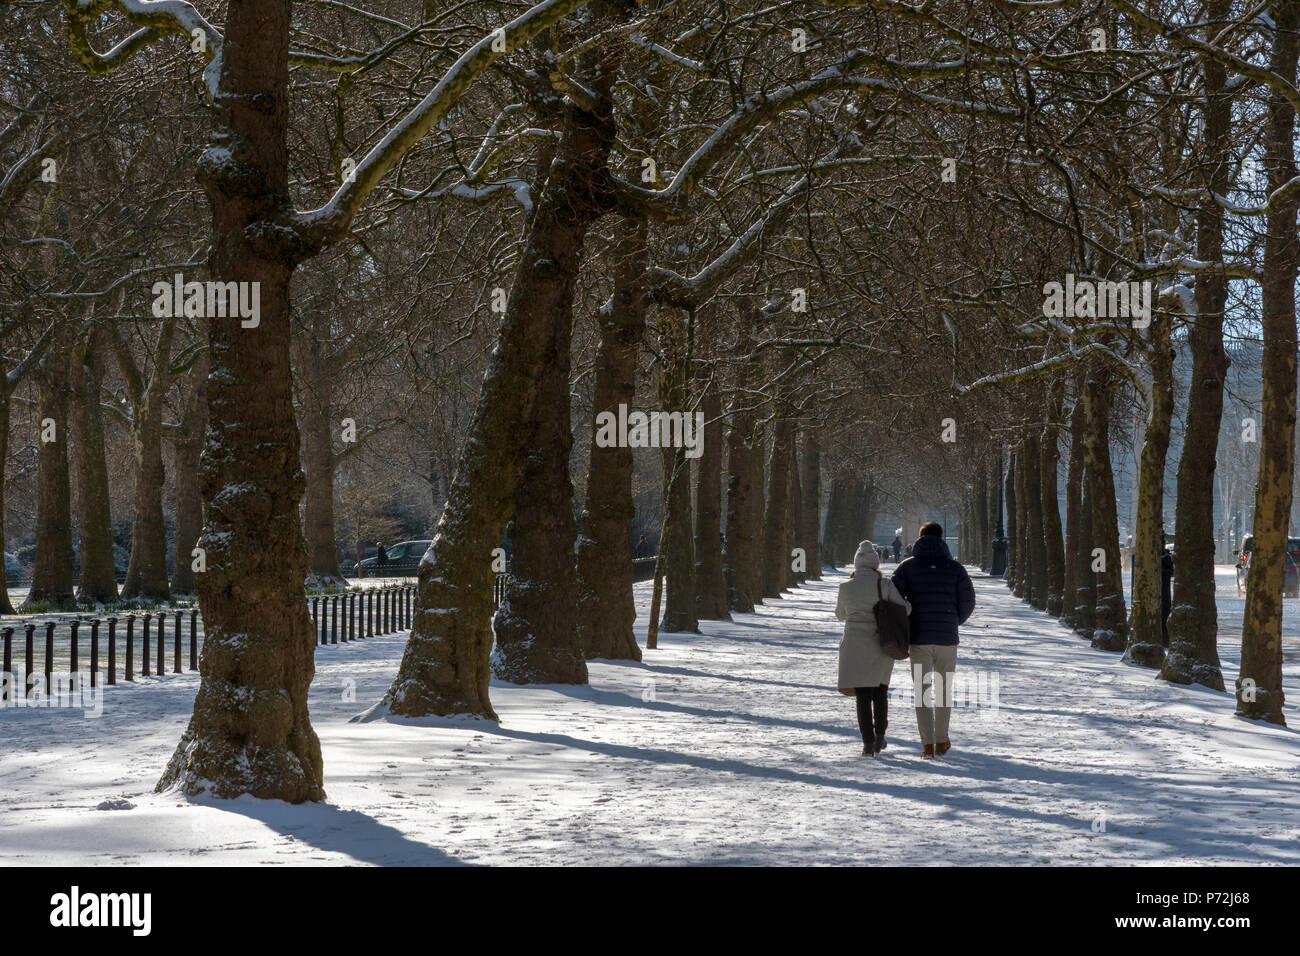 The Mall in the snow, London, England, United Kingdom, Europe Stock Photo